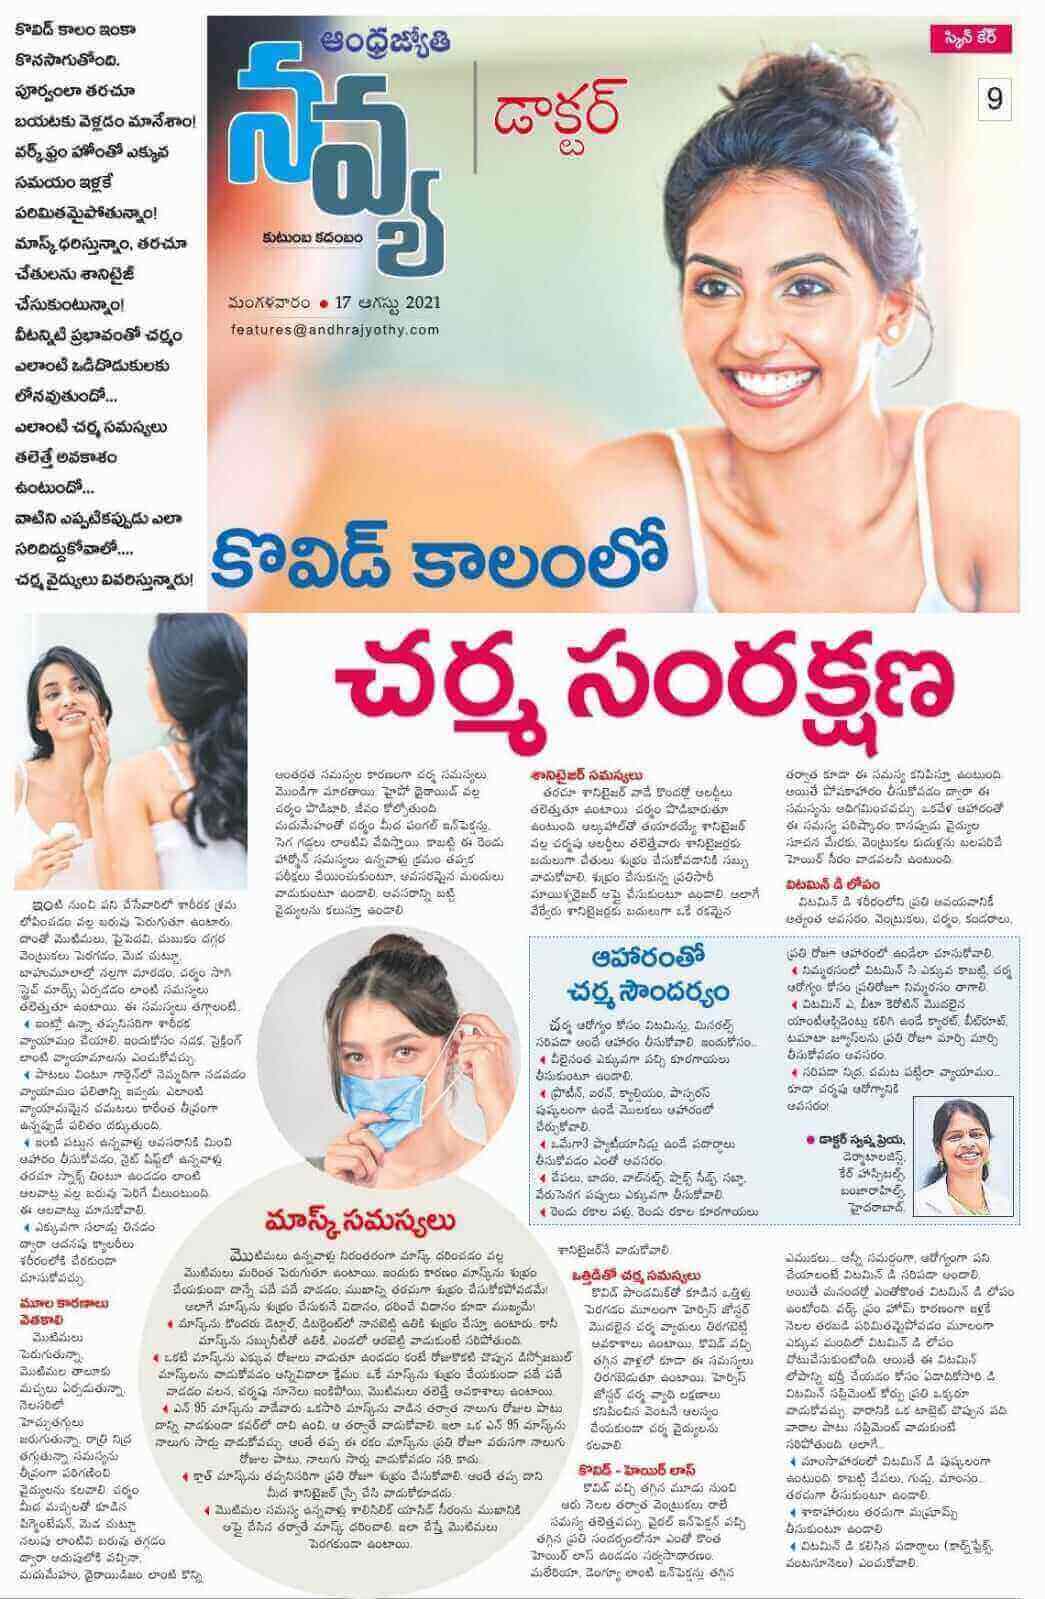 Article on Skin Care in COVID Time by Dr. Swapna Priya - Consultant Dermatologist